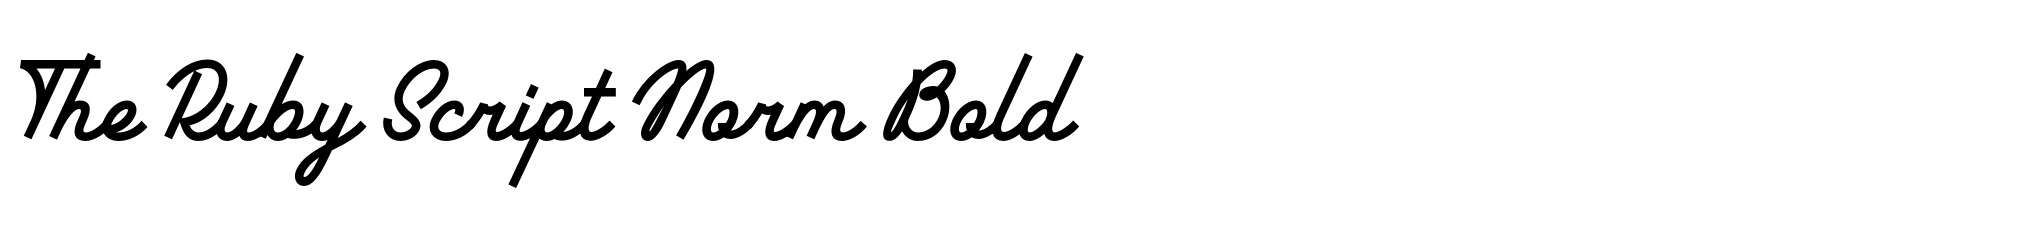 The Ruby Script Norm Bold image